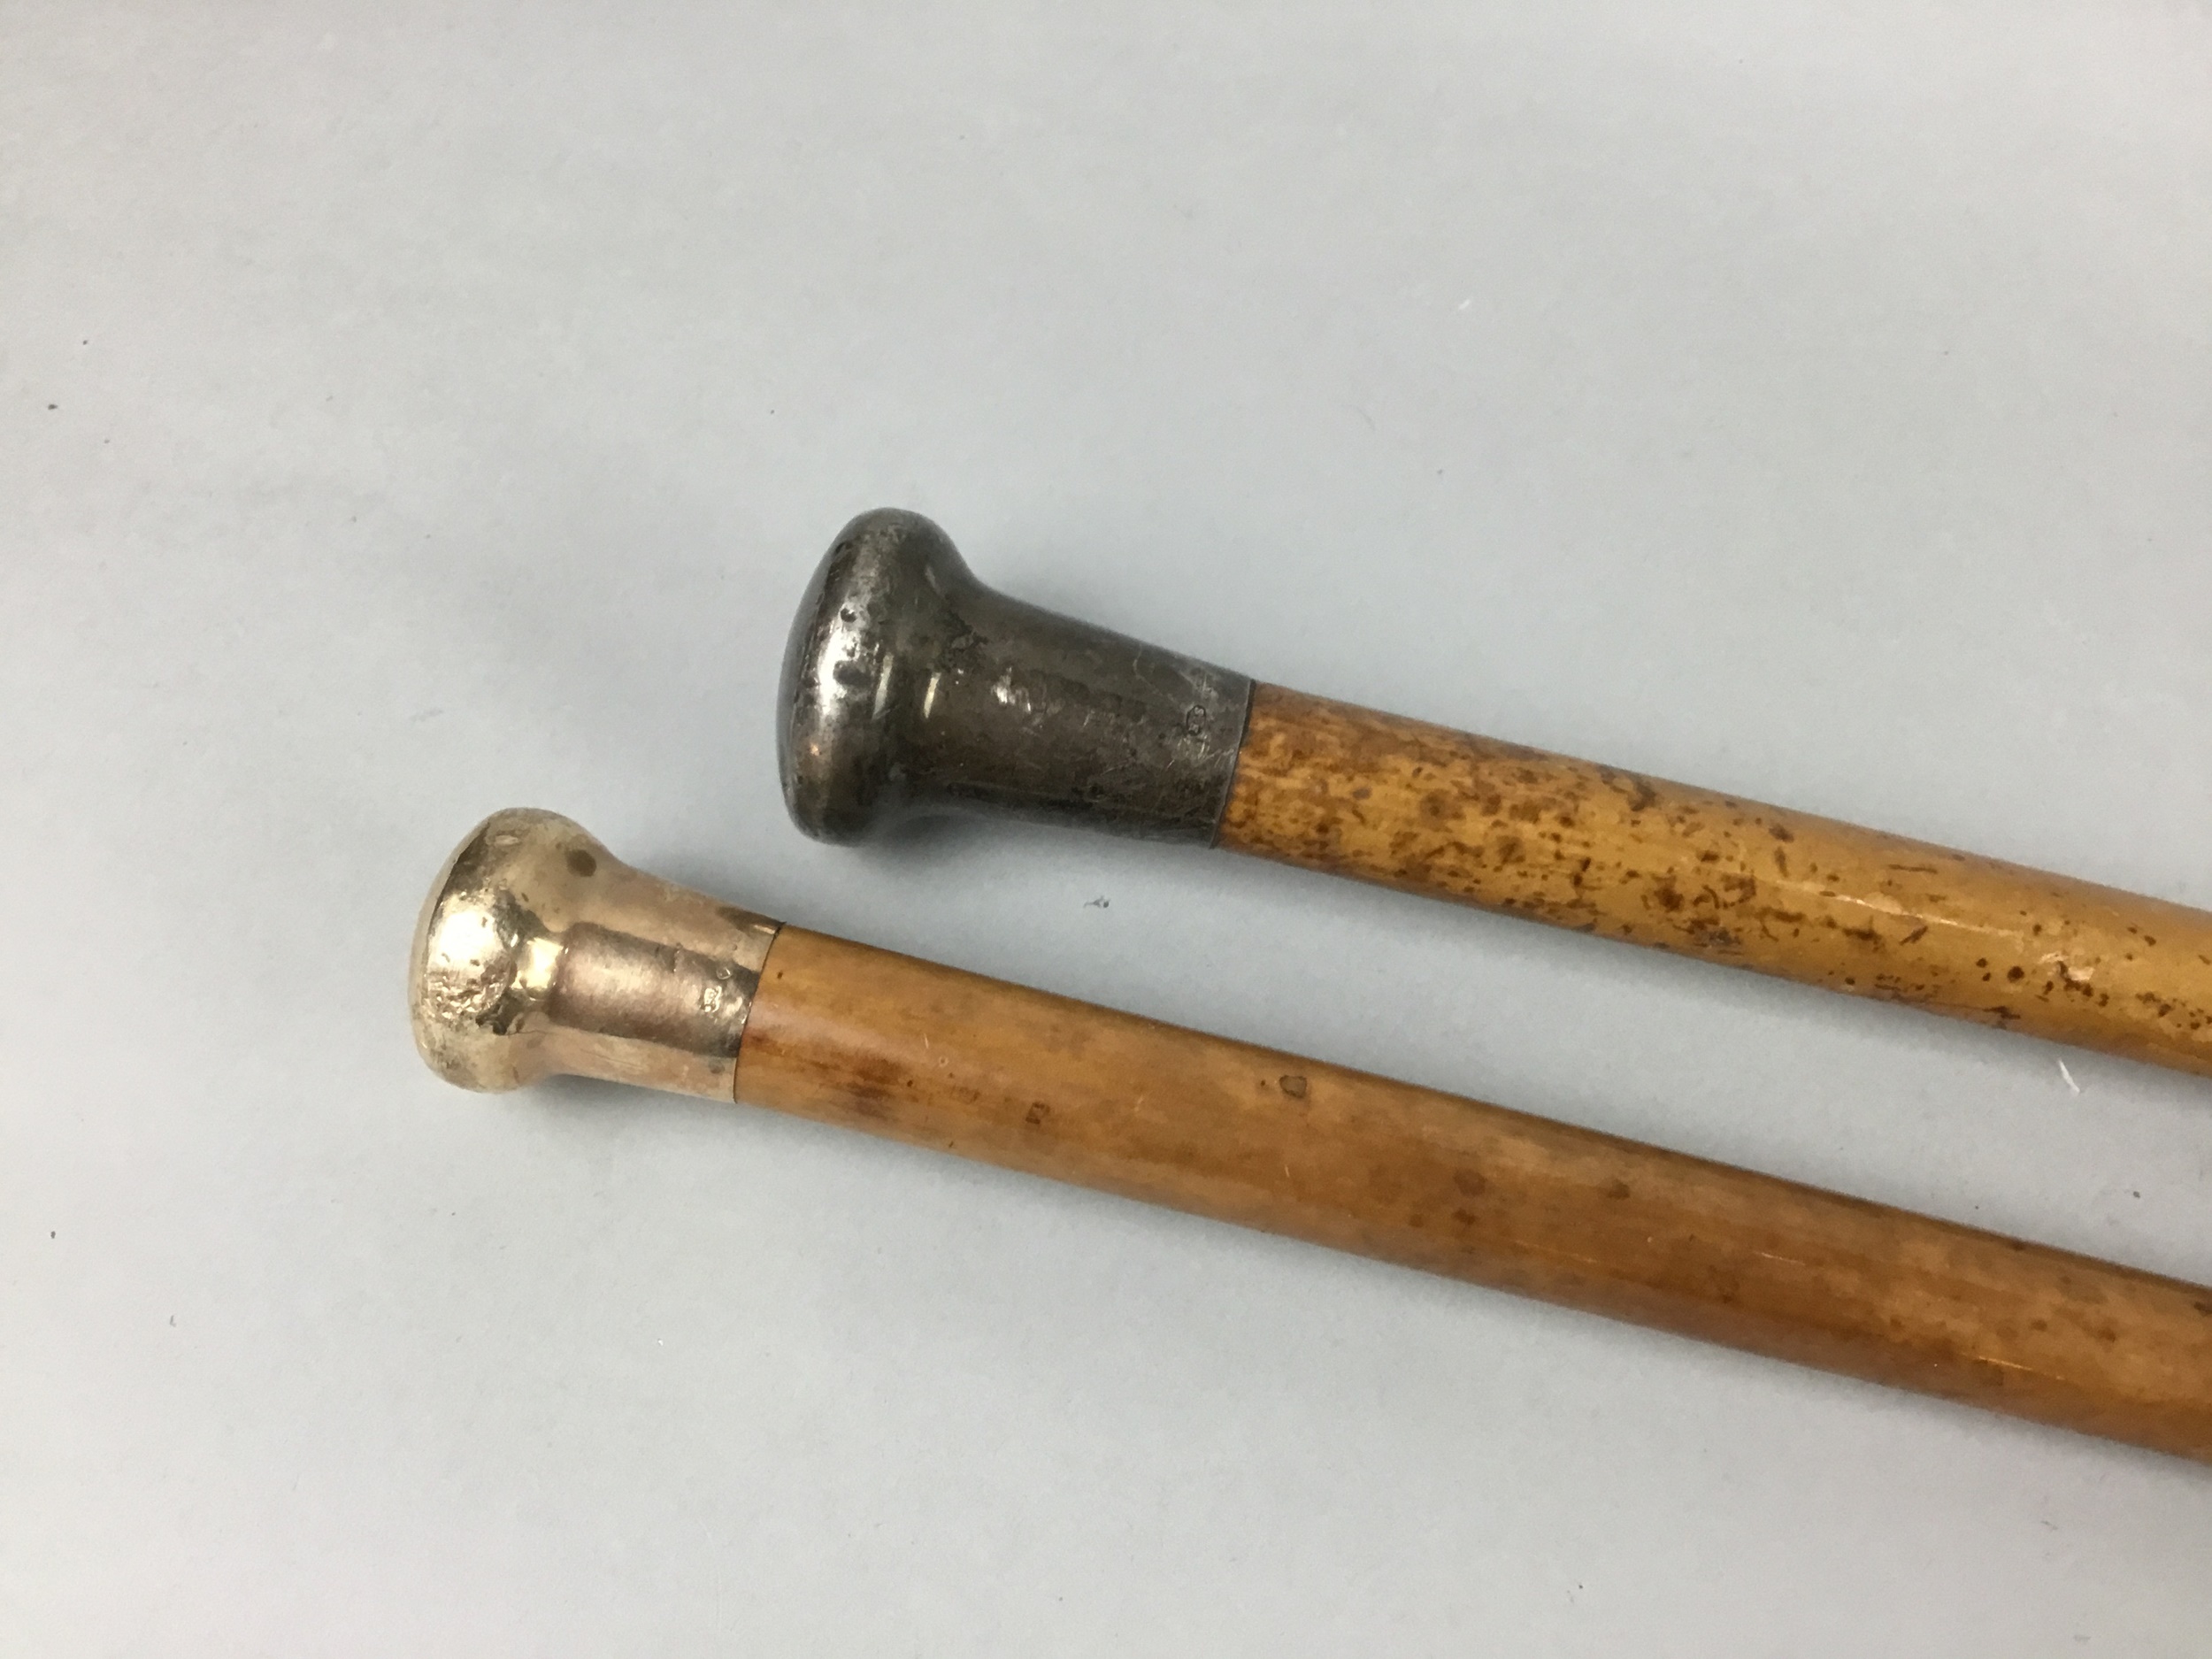 A GOLD AND A SILVER TOPPED CANE